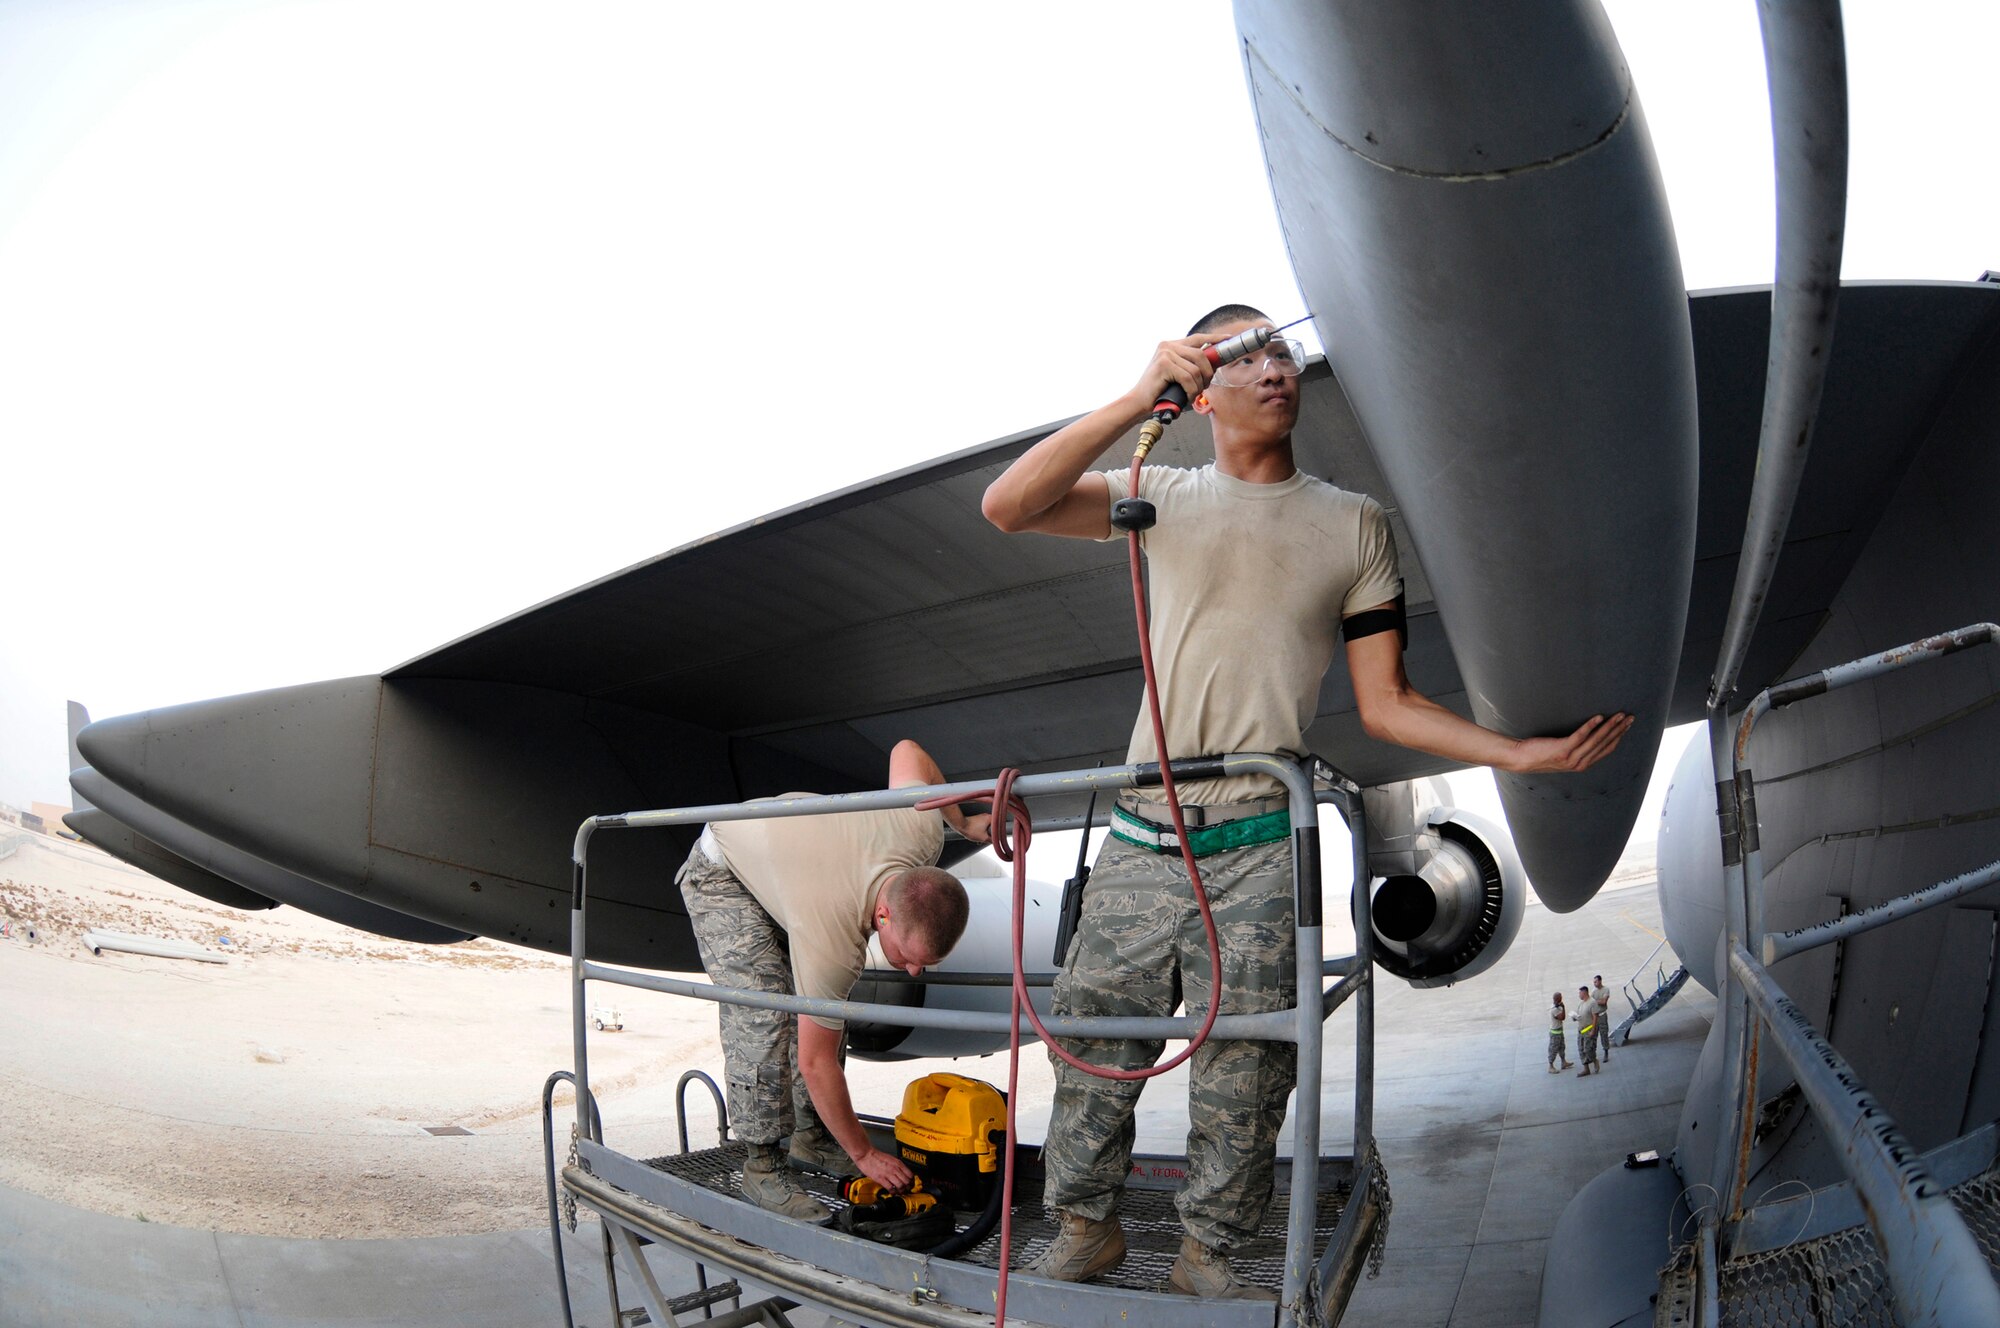 Airman 1st Class Matthew Enter, 379th Expeditionary Maintenance Squadron, uses a power drill to remove a stripped screw head, October 17, 2008.  Senior Airman Mark McMichael, EMXS, reaches for a vacuum to capture any fragments that come apart during drilling.  The bad screws are being removed so crew chiefs can pull the panel and do maintenance on a C-17 Globemaster III at an undisclosed air base in Southwest Asia.  Airman McMichael, a native of Denver, Colo., is deployed from Charleston Air Force Base, S.C., and Airman Enter, a native of Rochester, N.Y., is deployed from Fairchild AFB, Wash. Both Airmen are deployed in support of Operations Iraqi and Enduring Freedom and Joint Task Force-Horn of Africa.  (U.S. Air Force photo by Tech. Sgt. Michael Boquette/Released)